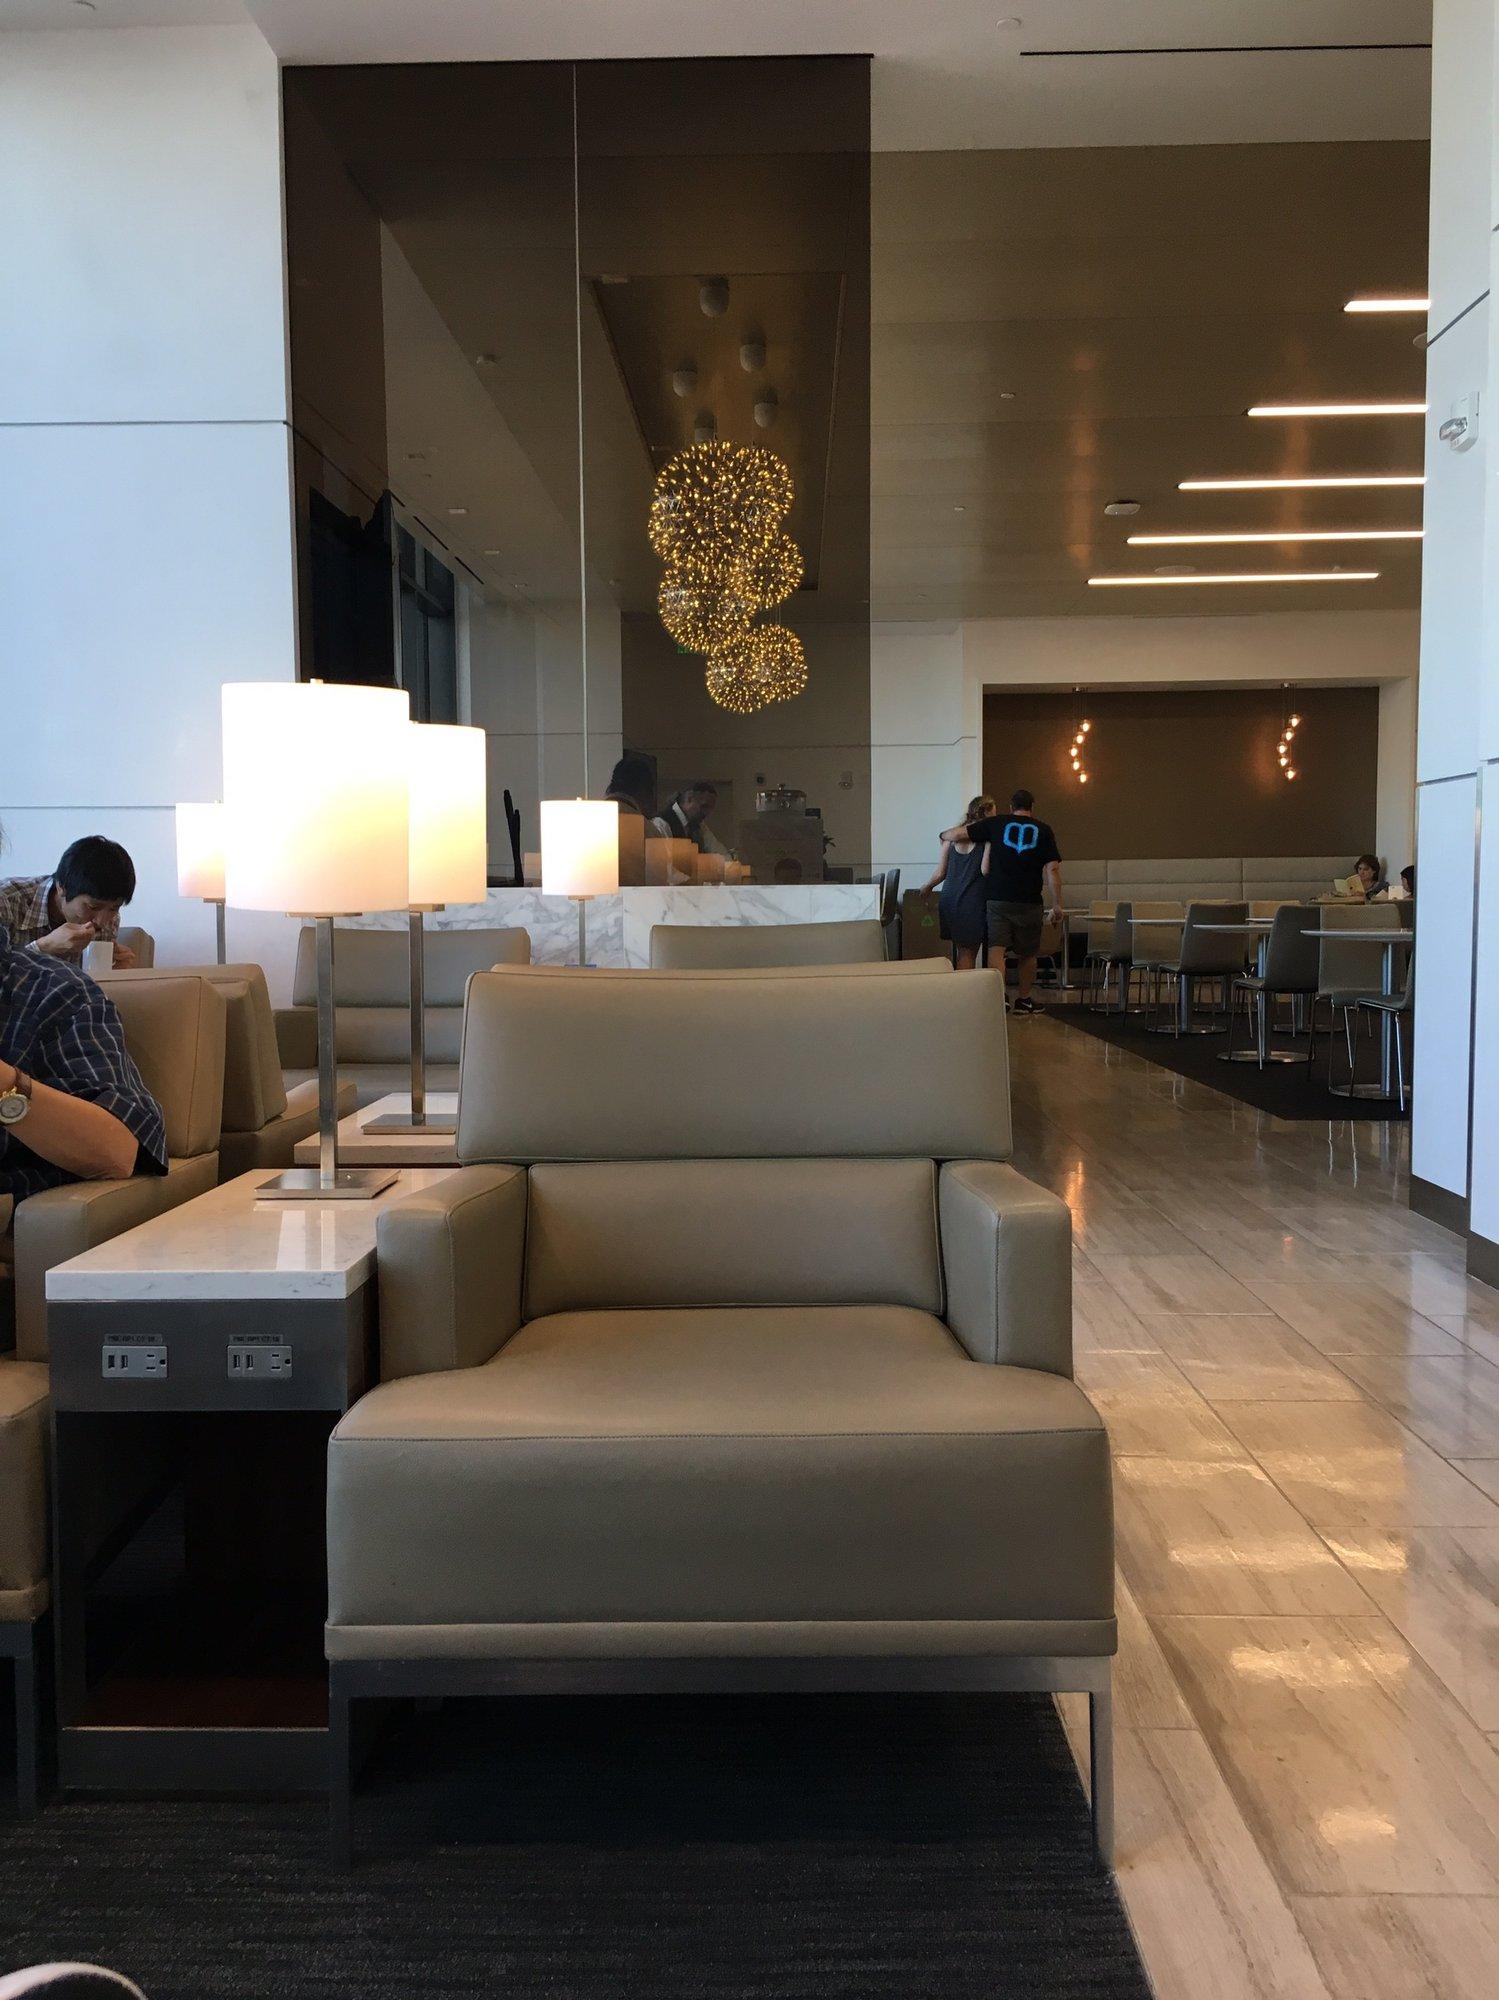 United Airlines United Club image 36 of 43